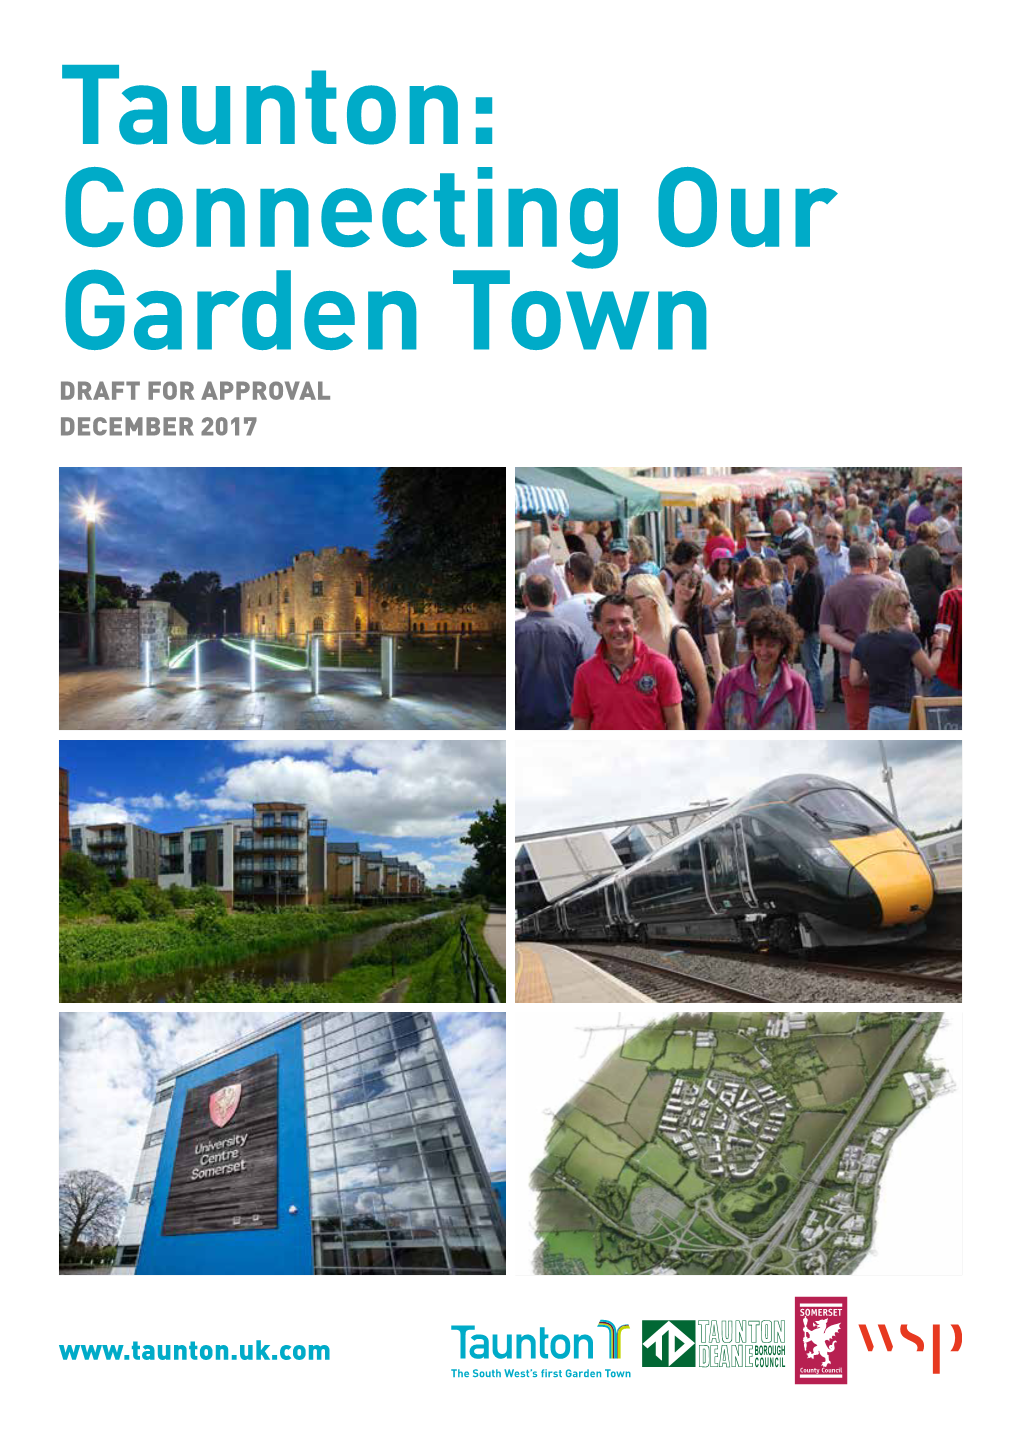 Taunton: Connecting Our Garden Town DRAFT for APPROVAL DECEMBER 2017